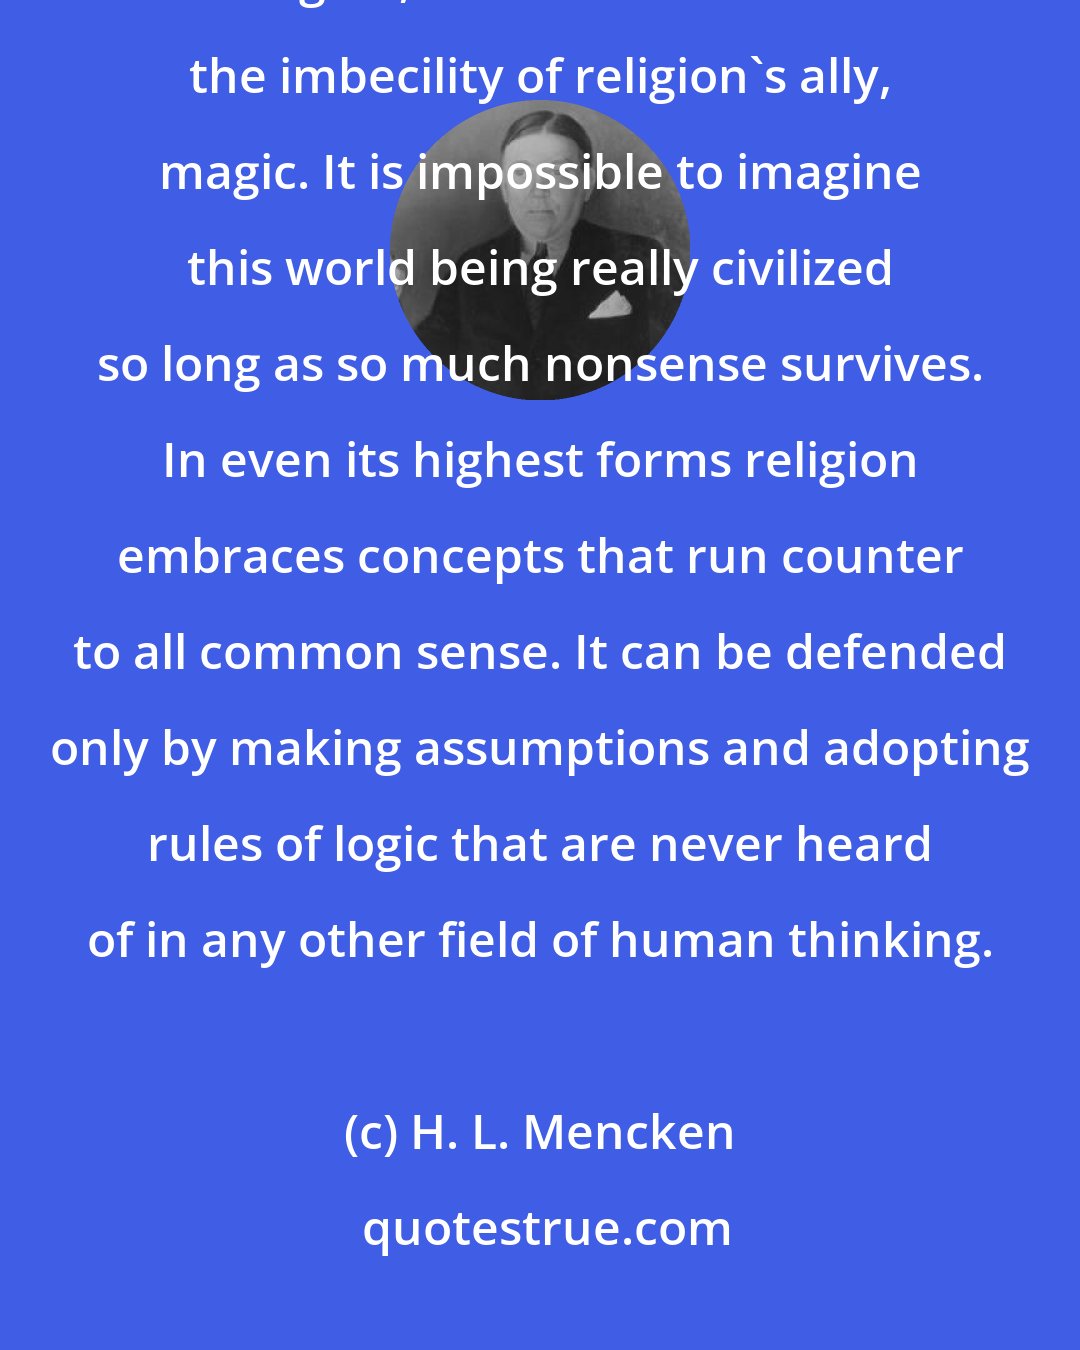 H. L. Mencken: The time must come inevitably when mankind shall surmount the imbecility of religion, as it has surmounted the imbecility of religion's ally, magic. It is impossible to imagine this world being really civilized so long as so much nonsense survives. In even its highest forms religion embraces concepts that run counter to all common sense. It can be defended only by making assumptions and adopting rules of logic that are never heard of in any other field of human thinking.